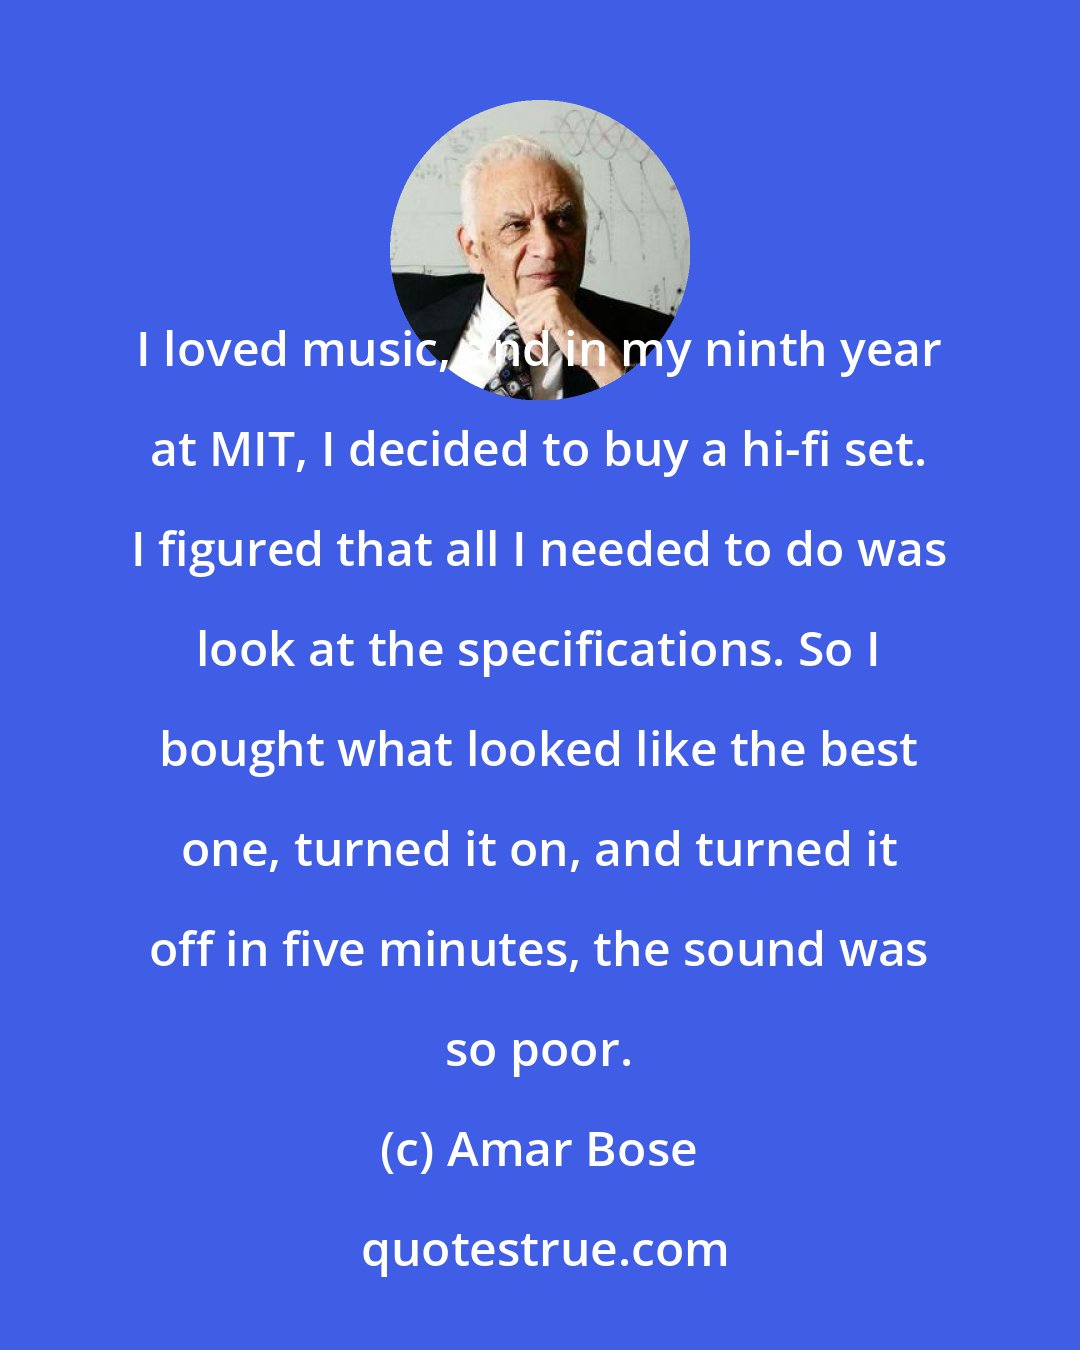 Amar Bose: I loved music, and in my ninth year at MIT, I decided to buy a hi-fi set. I figured that all I needed to do was look at the specifications. So I bought what looked like the best one, turned it on, and turned it off in five minutes, the sound was so poor.